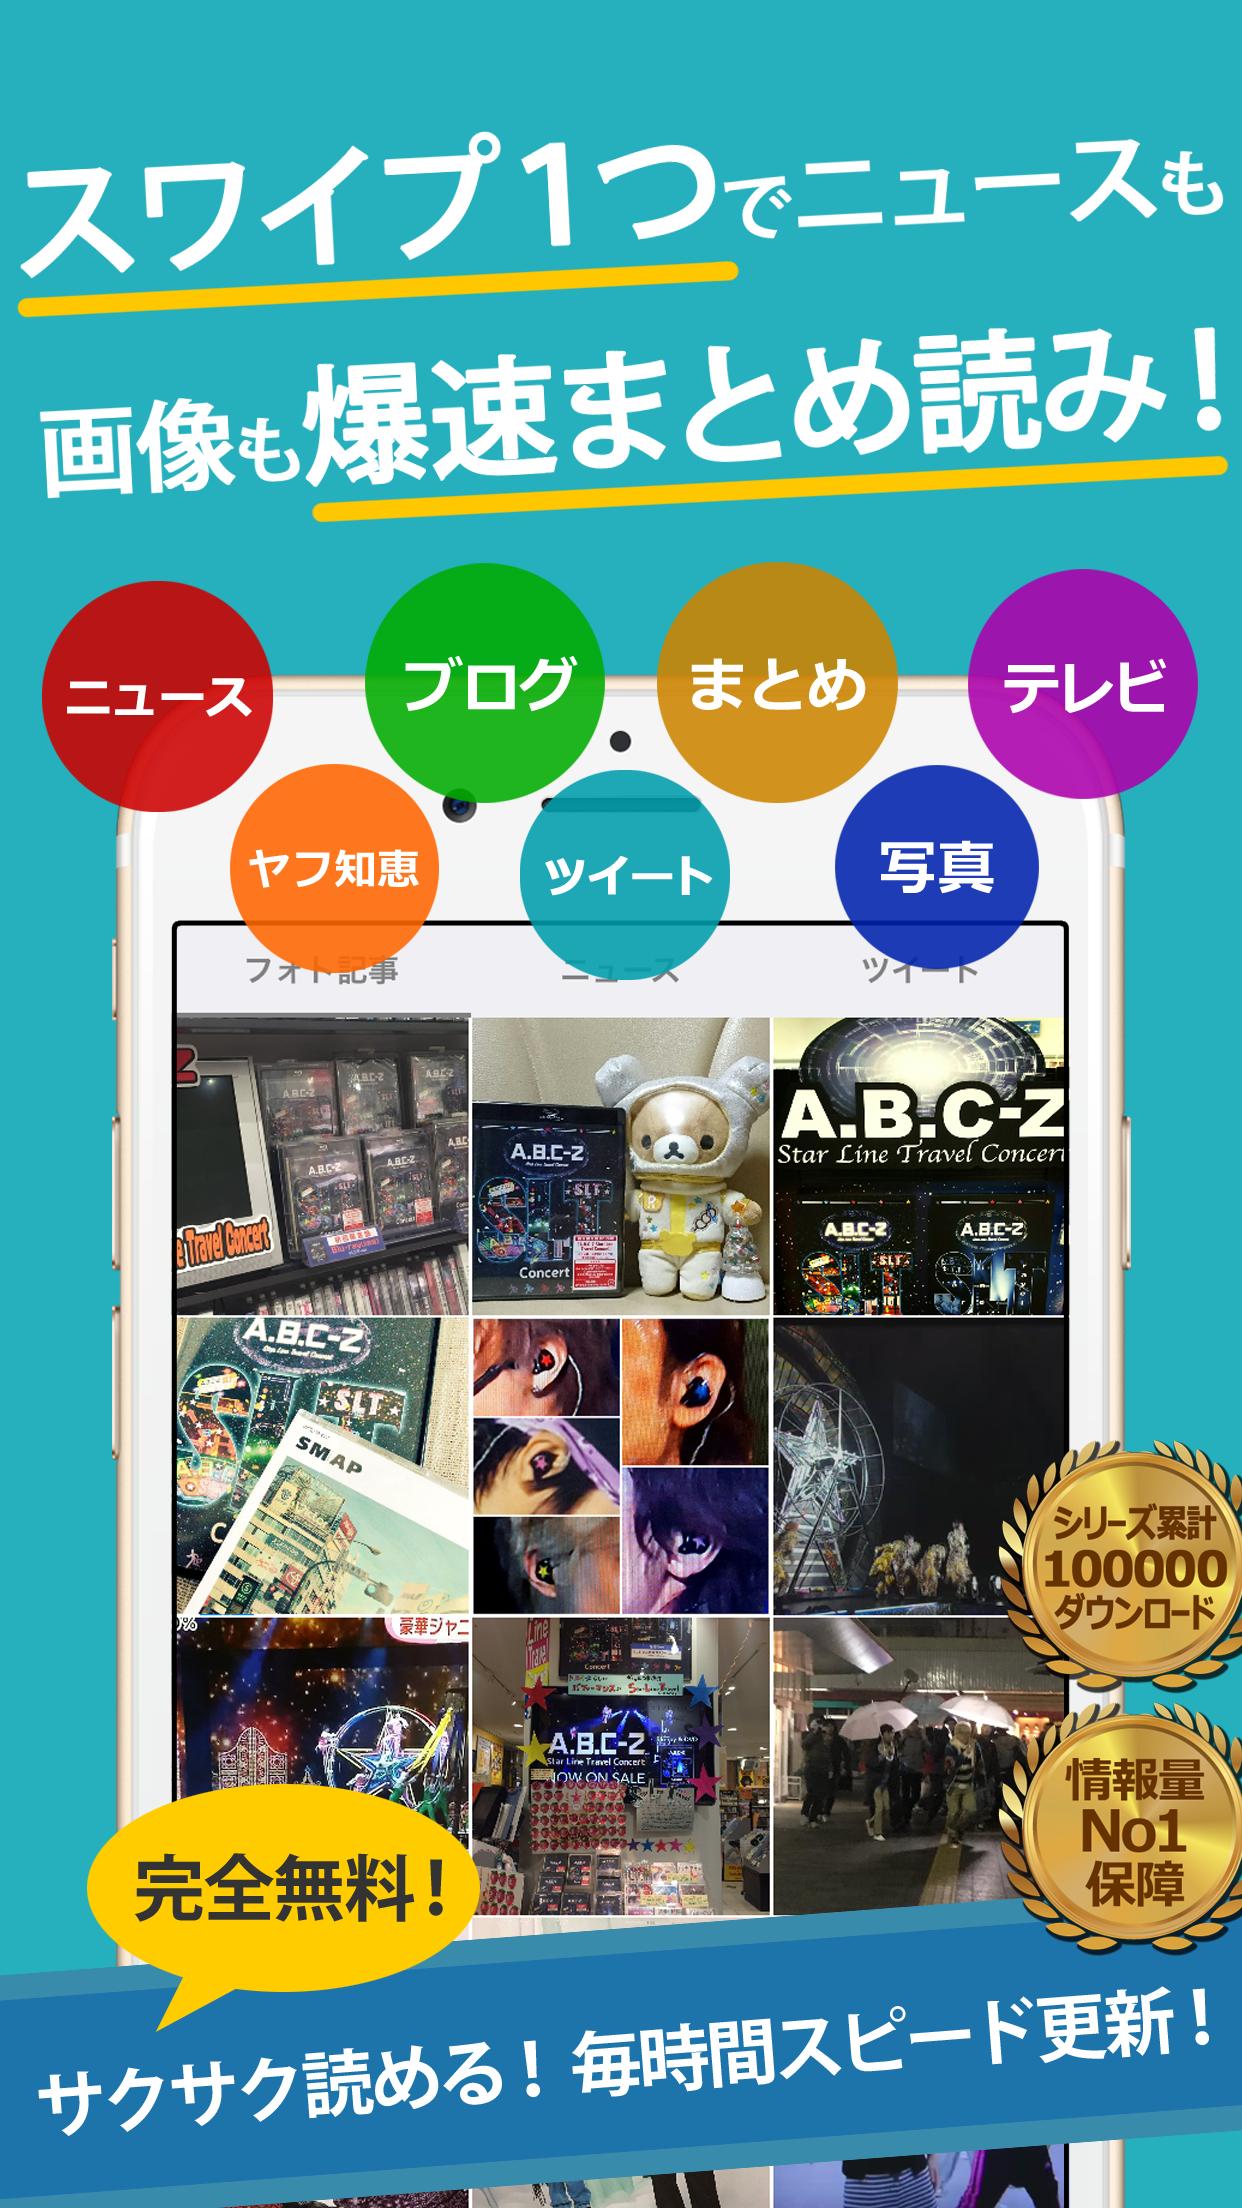 Abc Zまとめったー For Abczジャニーズ For Android Apk